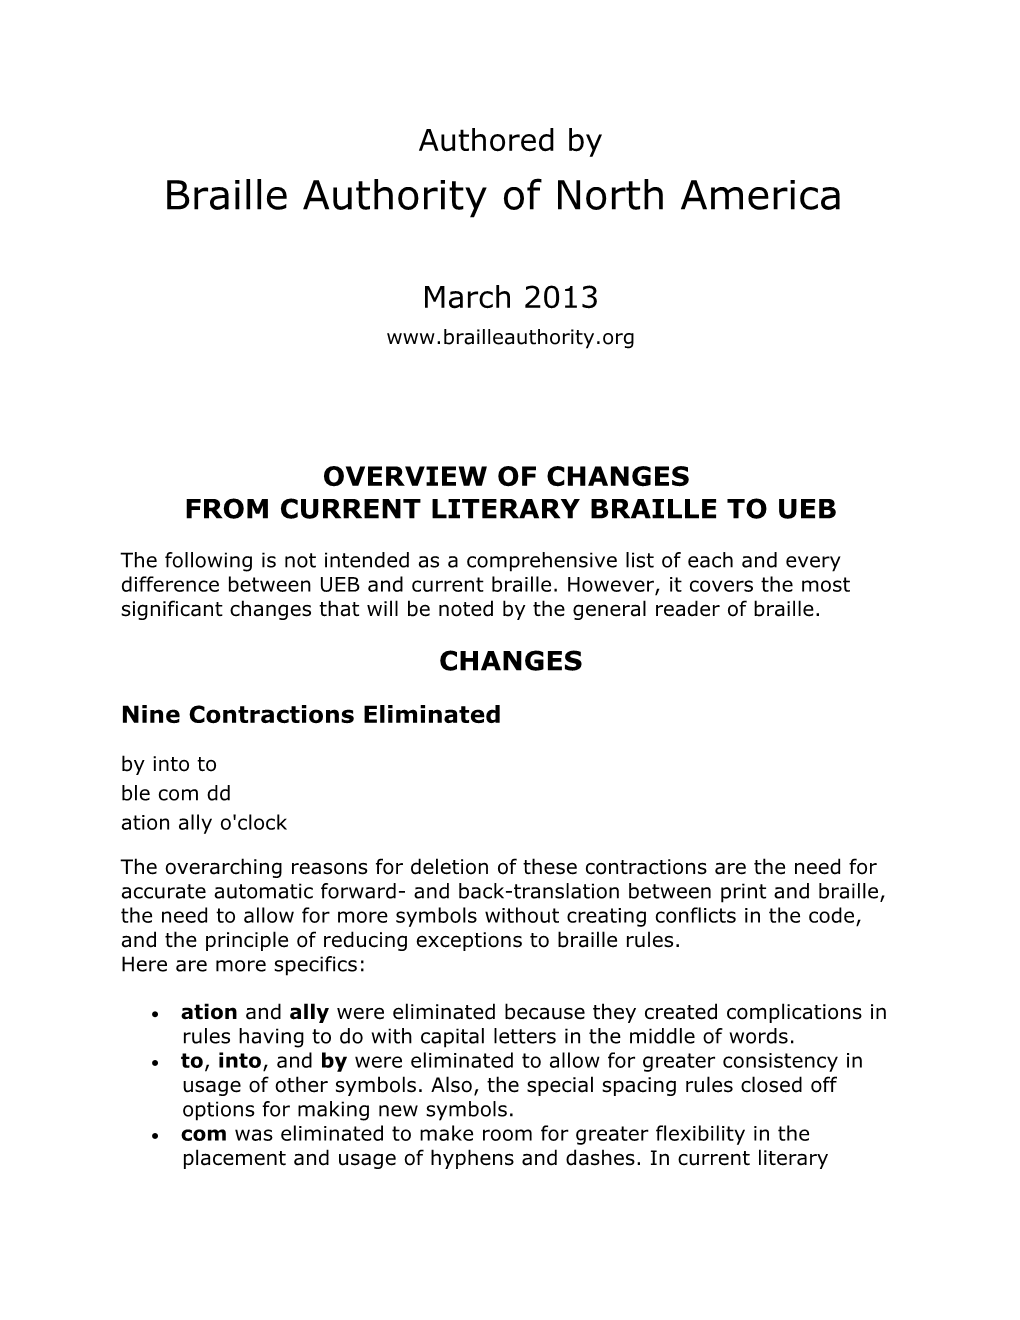 Overview of Changes from Current Literary Braille to Unified English Braille